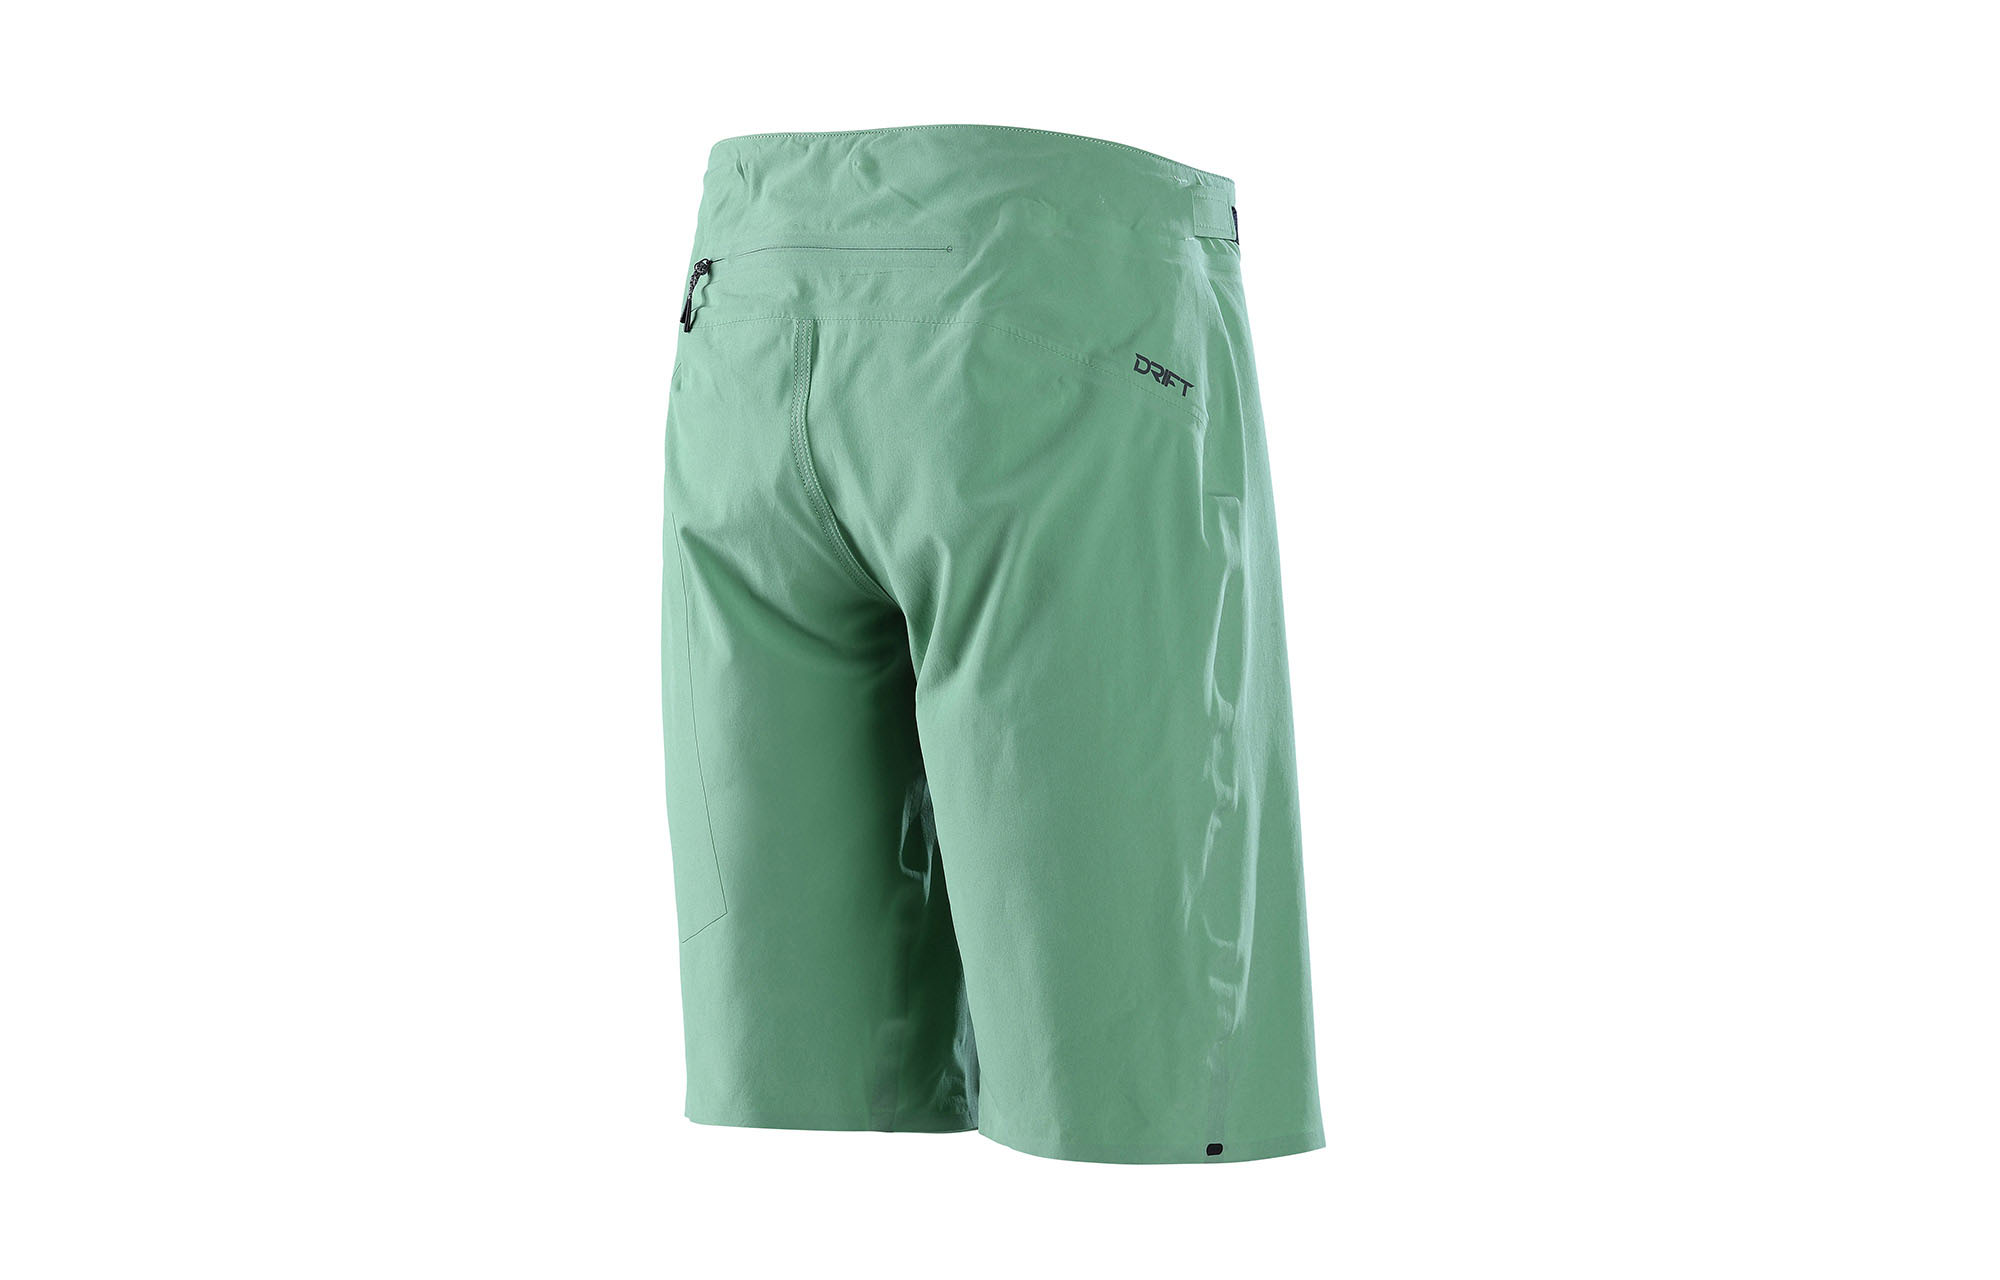 TROY LEE DESIGNS DRIFT SHORTS - GLASS GREEN image number null